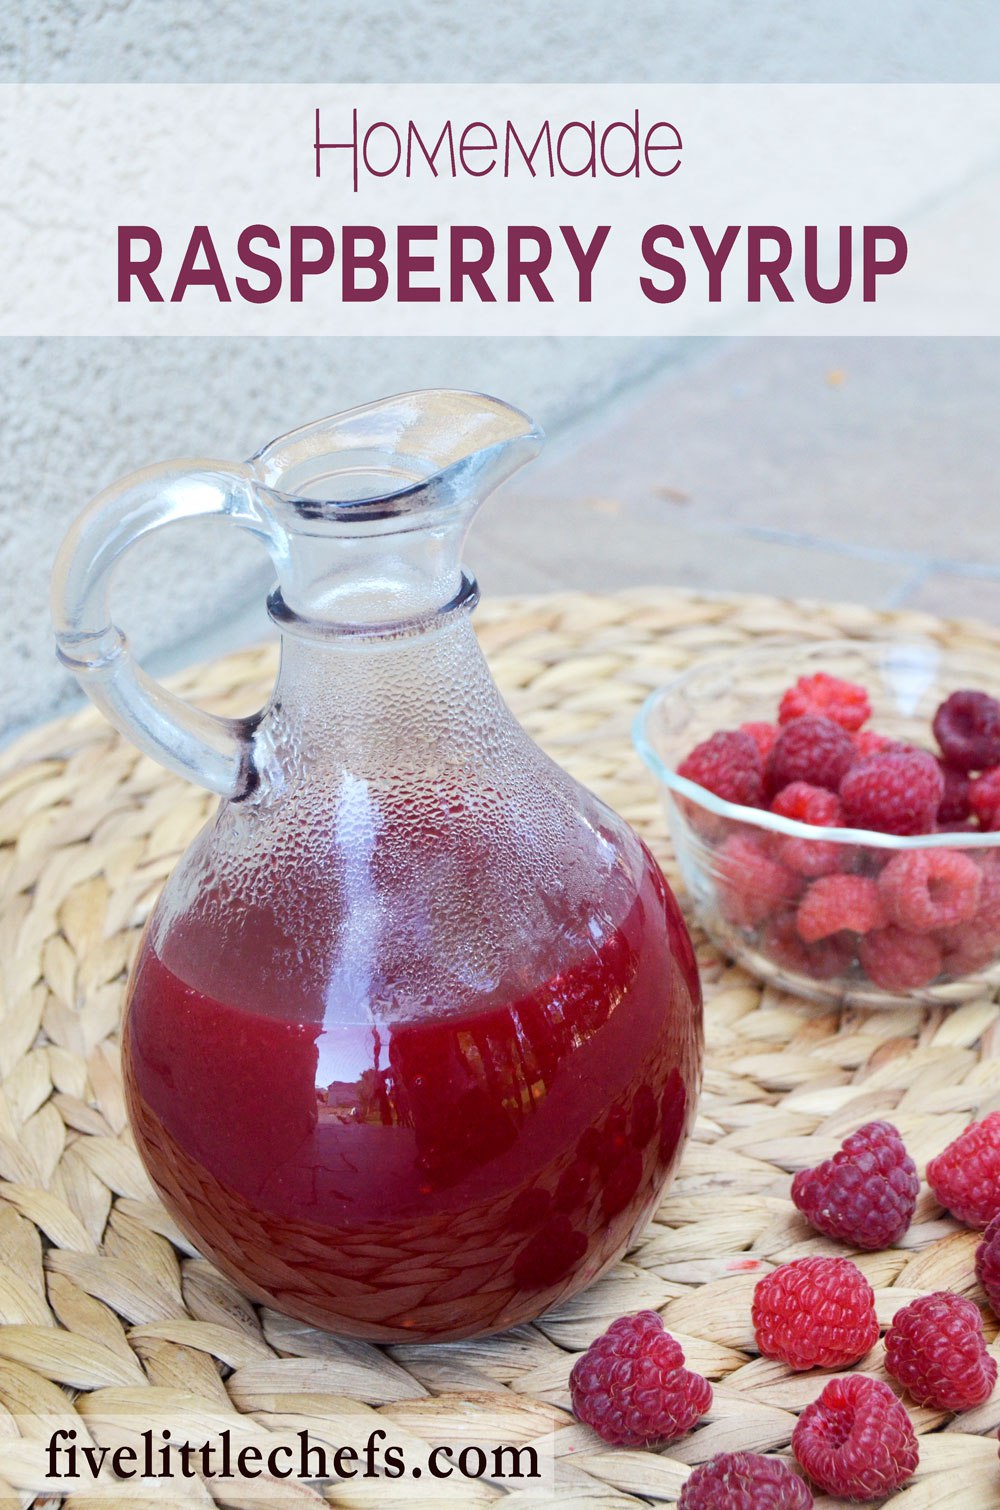 Homemade raspberry syrup is sweet which makes it perfect to put on french toast, pancakes or waffles. It is also delicious on top of a bowl of ice cream. This is an easy recipe to whip up!